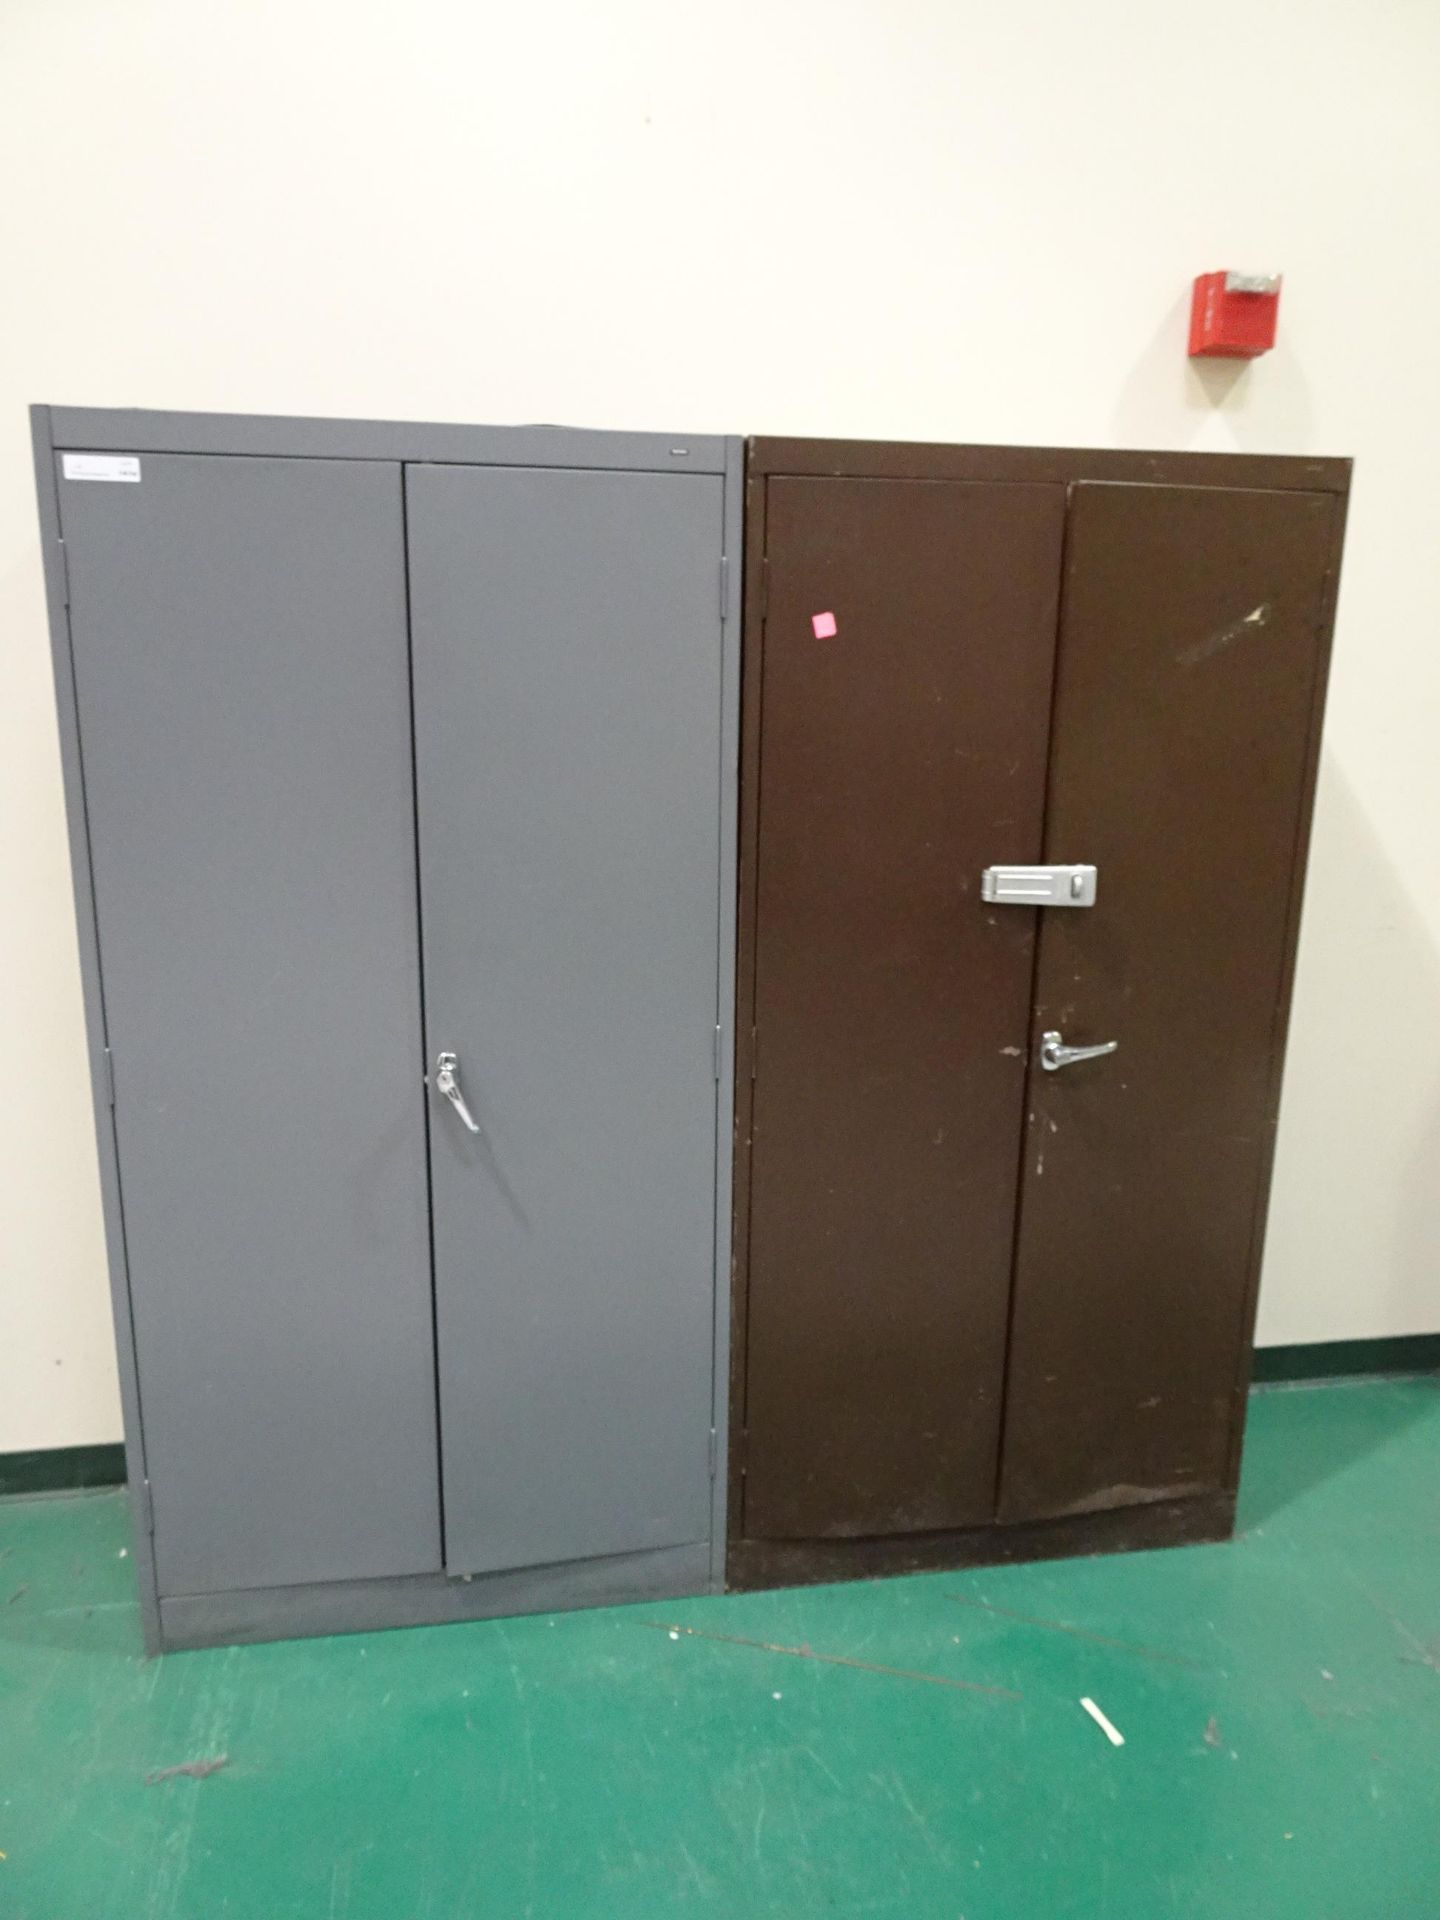 (2) D-Door Metal Storage Cabinets And Contents, Contents Include But Not Limited To: Various